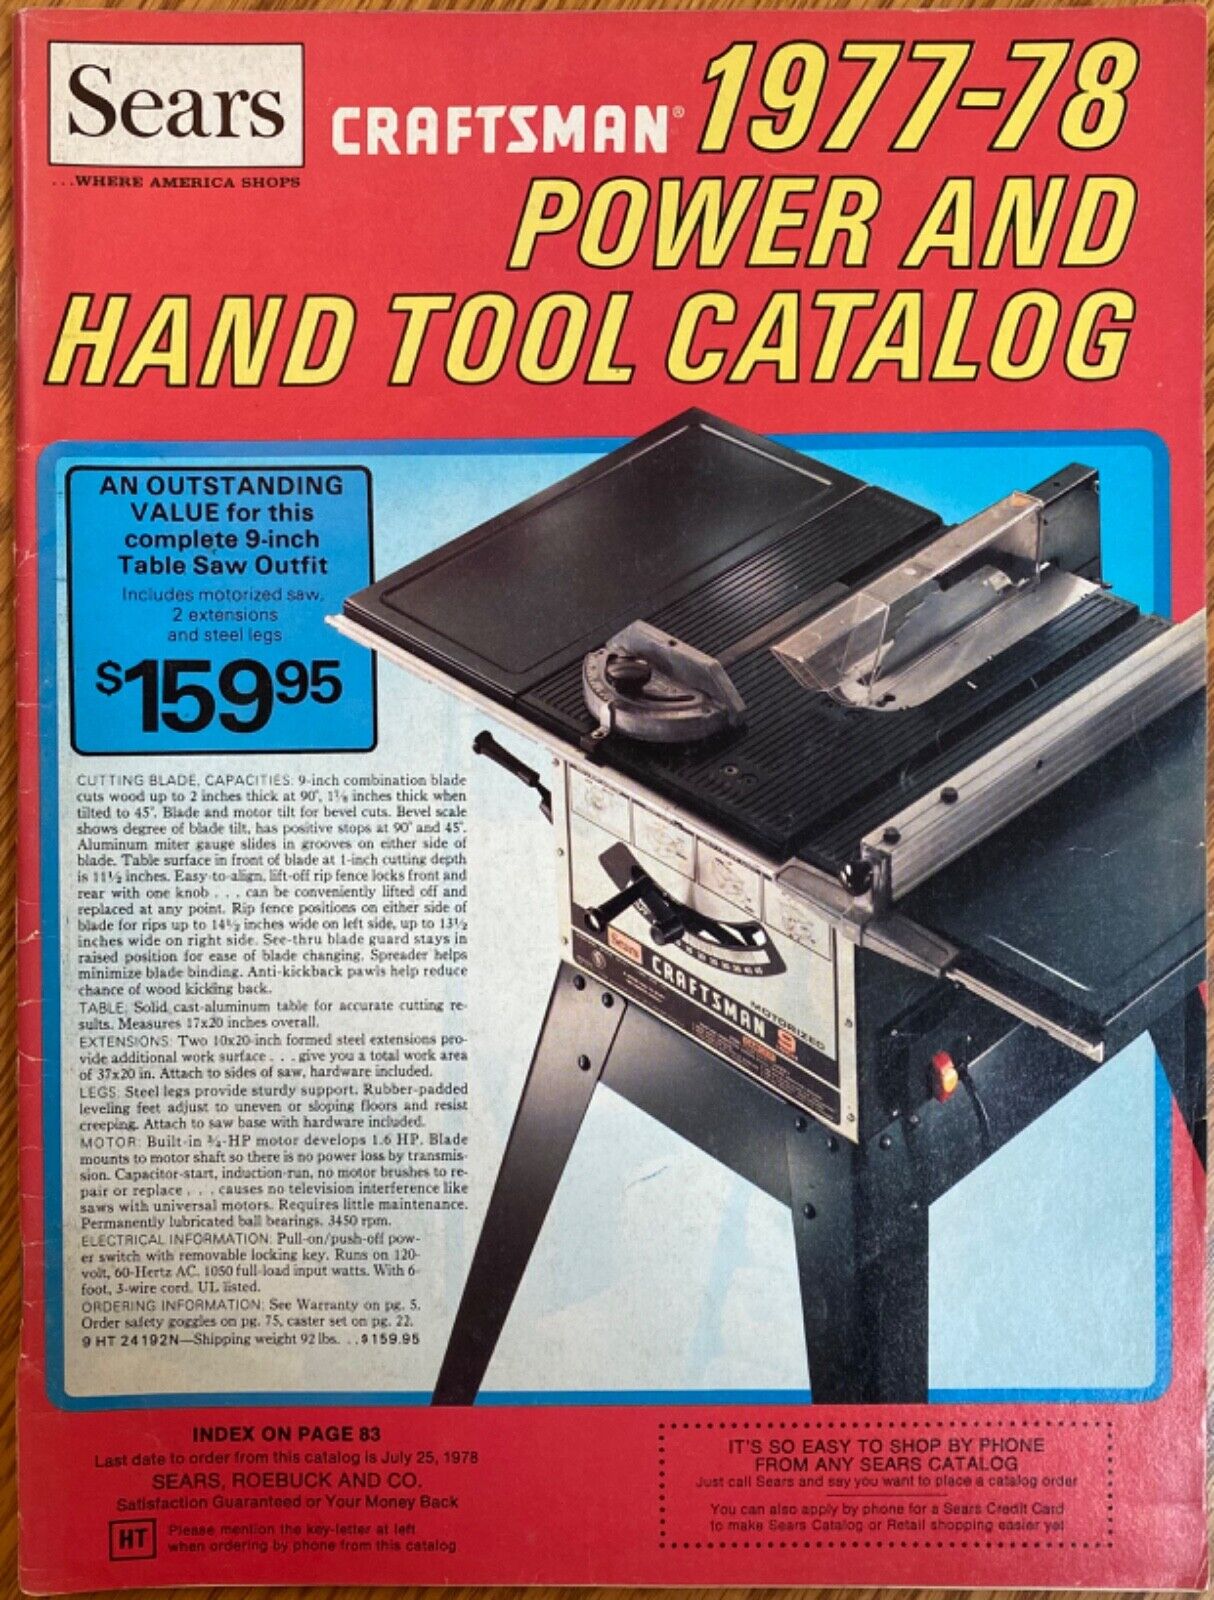 Vintage Sears Craftsman 1977-1978 Power and Hand Tools Catalog, 135 pages